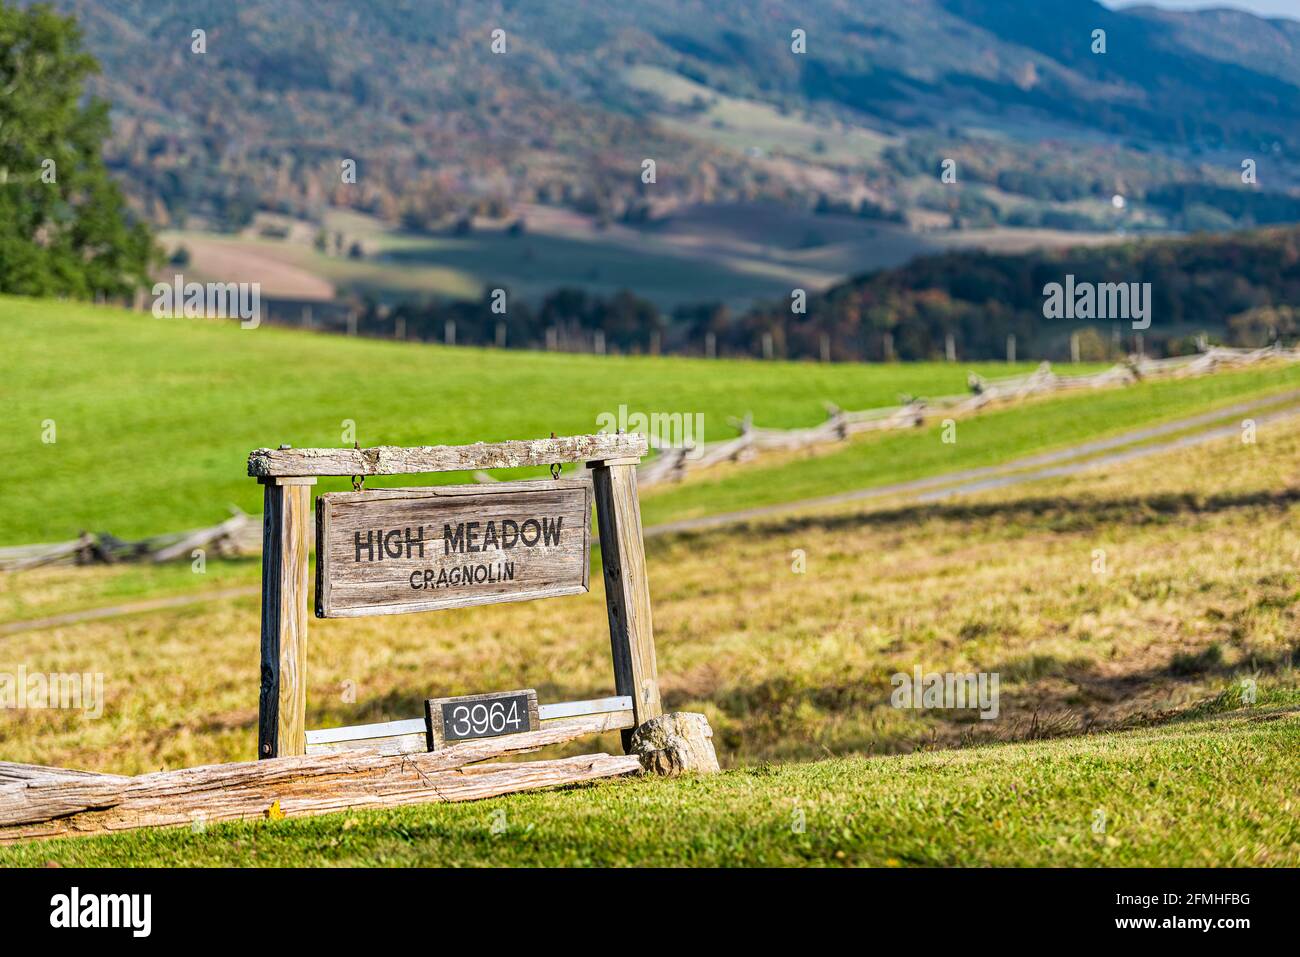 Blue Grass, USA - October 7, 2020: Homestead farm property sign for High Meadow Gragnolin with street address in Highland county by town of Monterey, Stock Photo